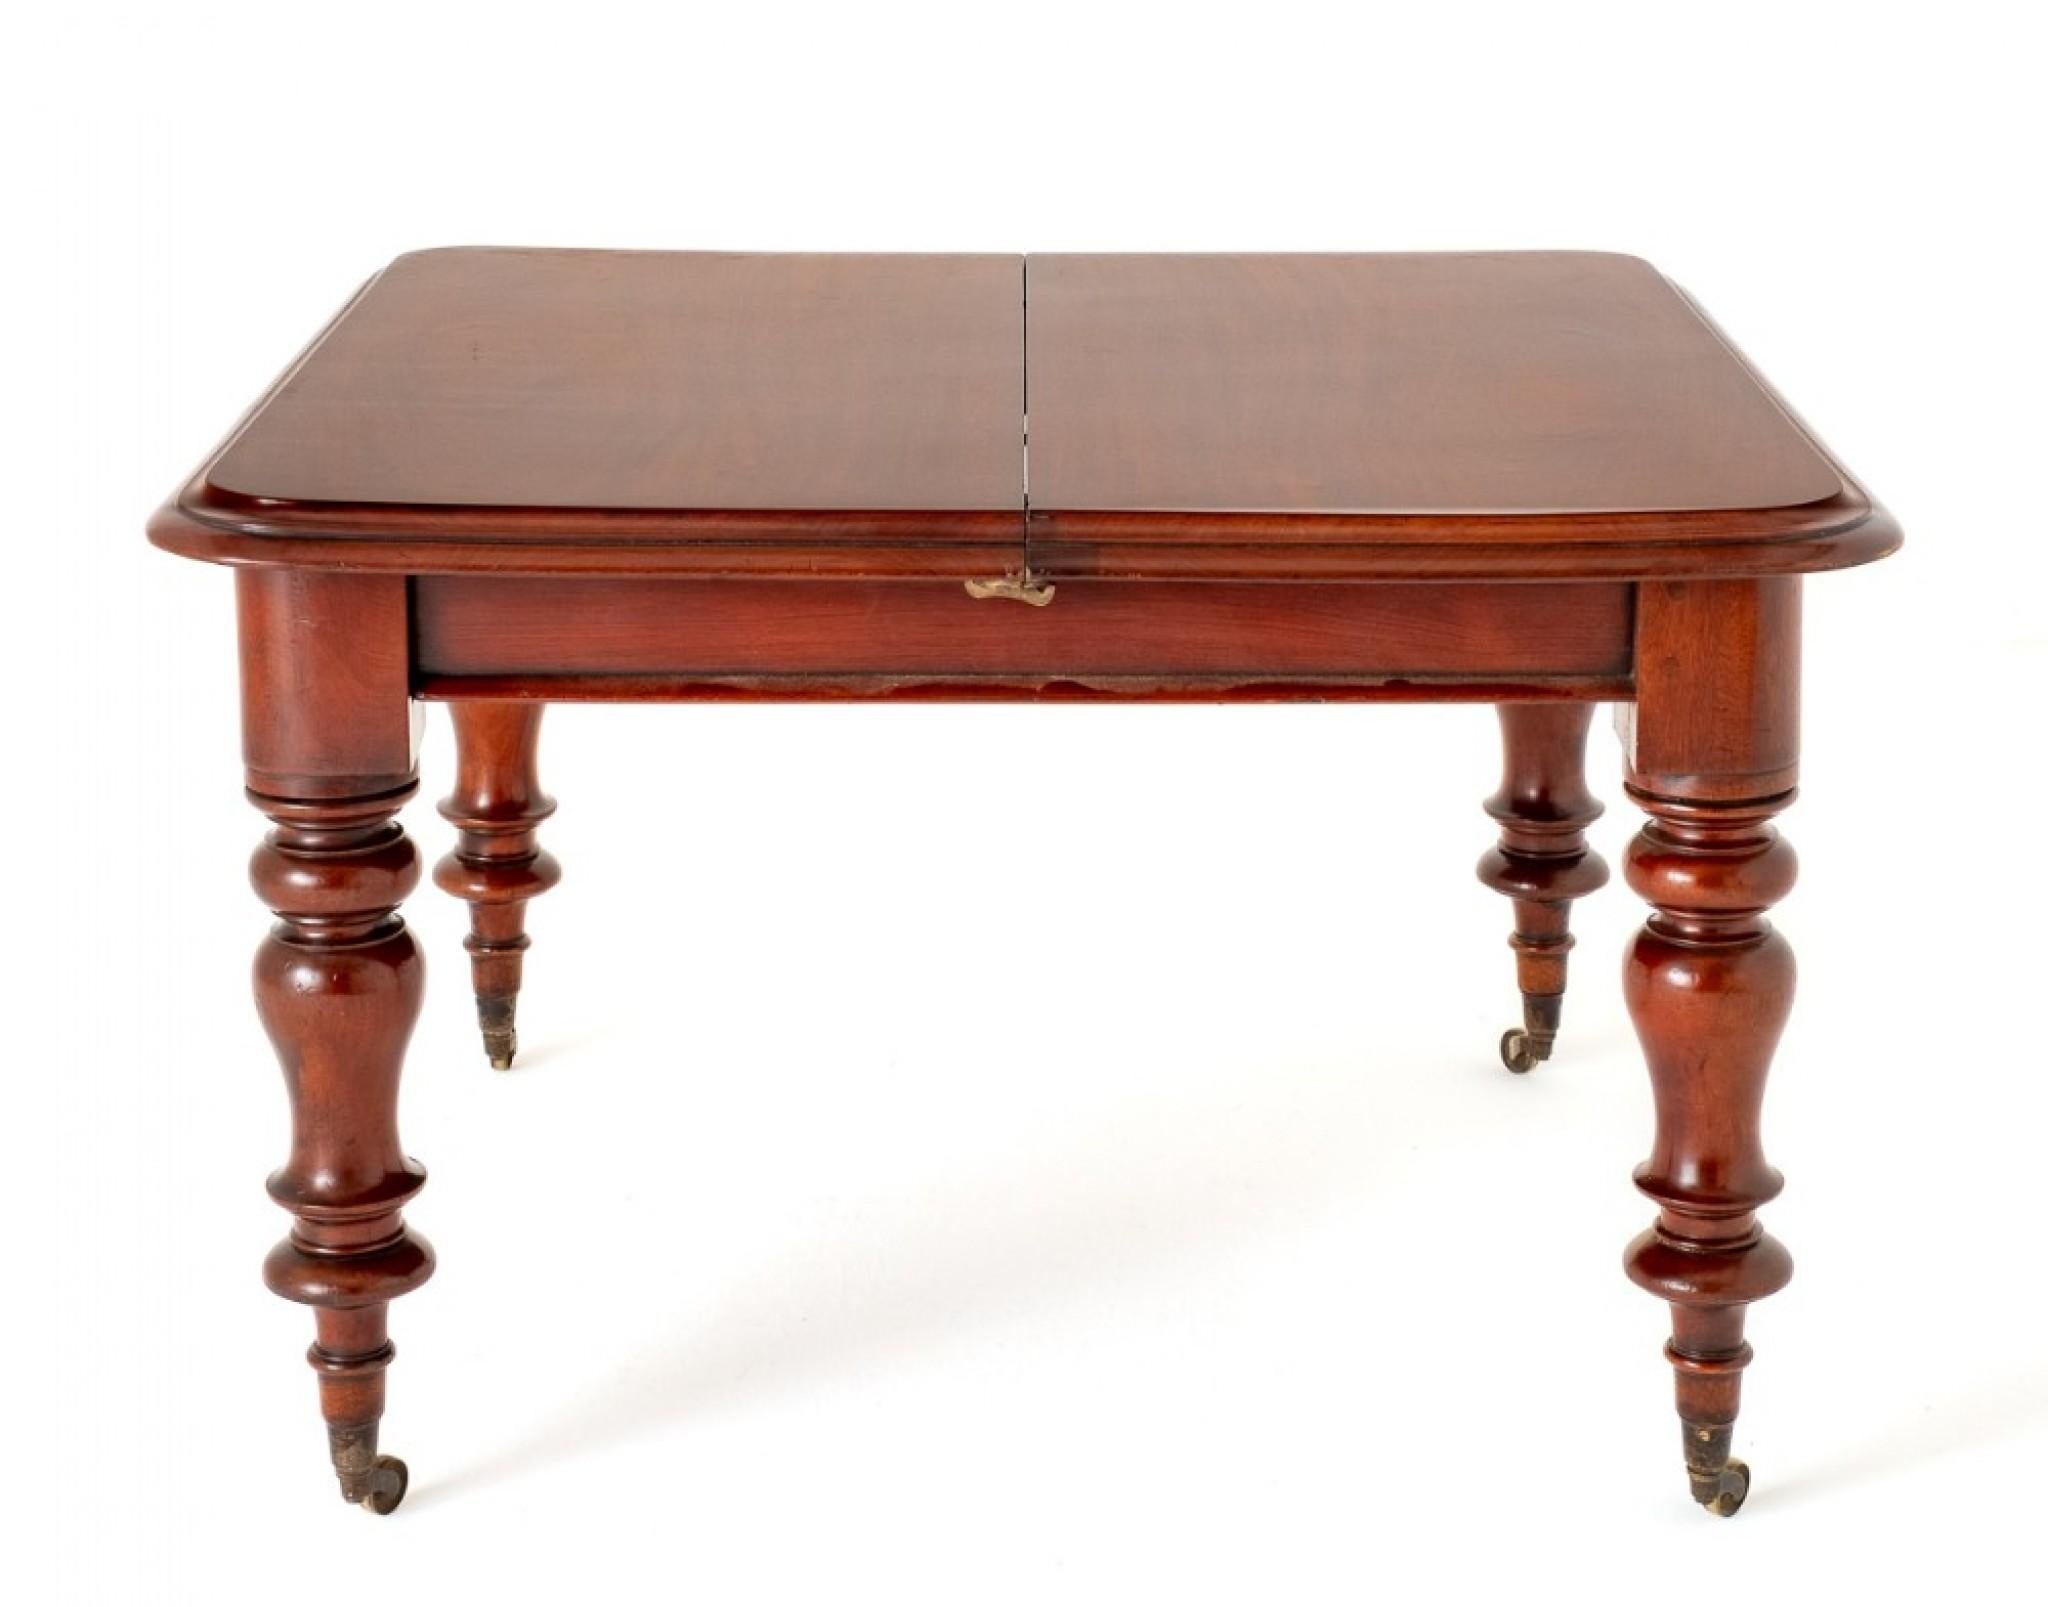 Victorian Mahogany 2 Leaf Extending Dining Table.
Circa 1860
This Dining Table is Raised upon Ring Turned Legs with Original Brass castors.
The Table Extends By Way of a Pullout Telescopic Mechanism to accept up to 2 Extra Leaves.
The Top of the